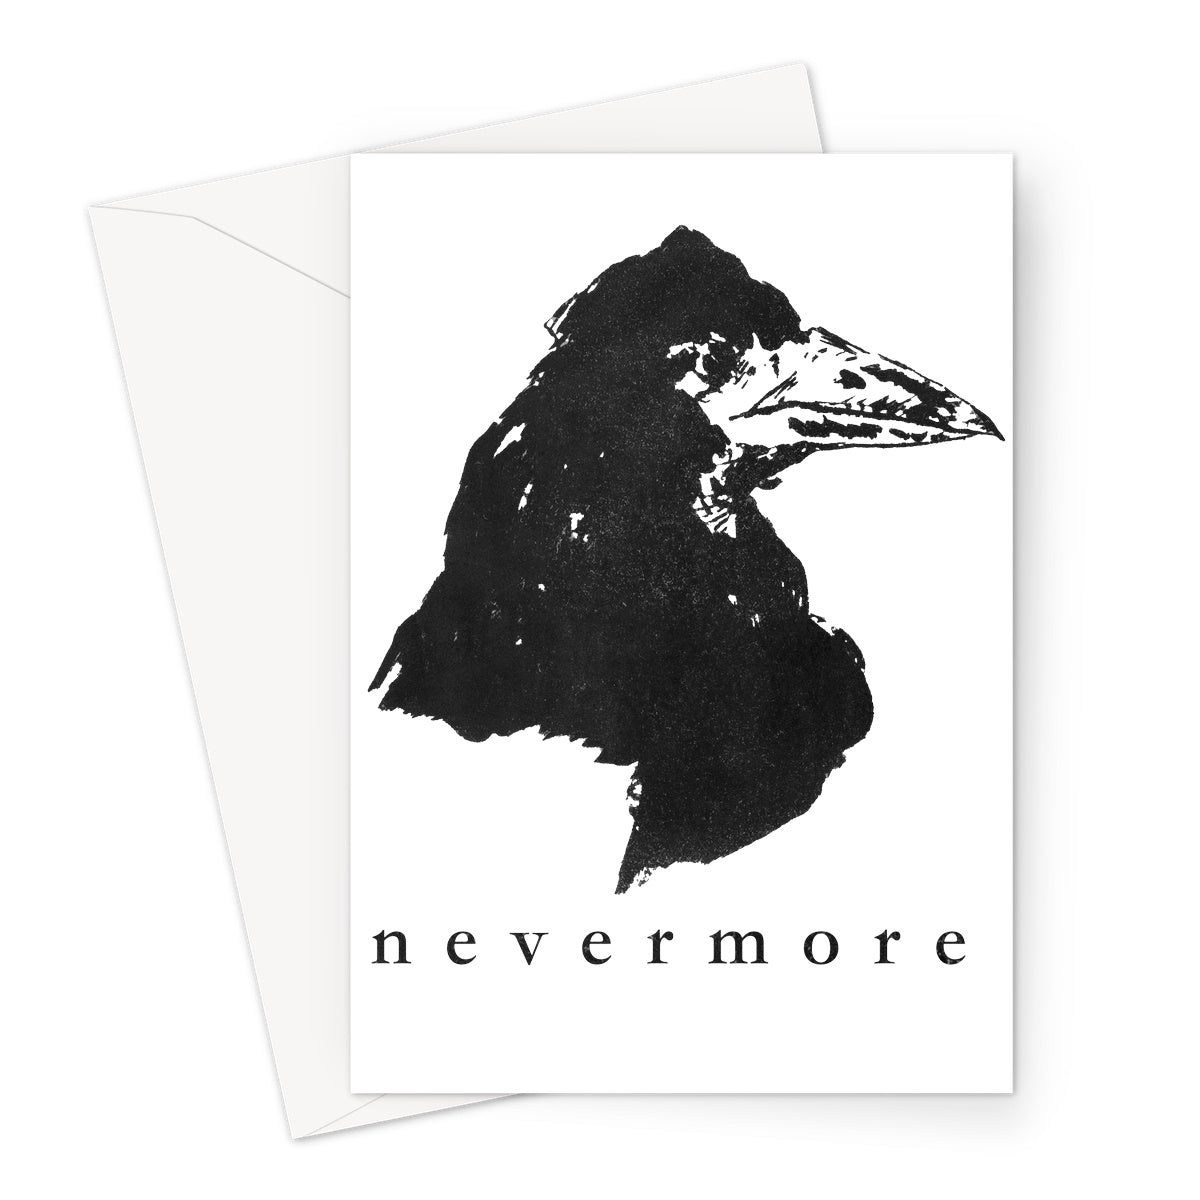 Greeting card featuring a design for the Poster and Cover for Edgar Allan Poe's 'The Raven' by Édouard Manet - 1875.